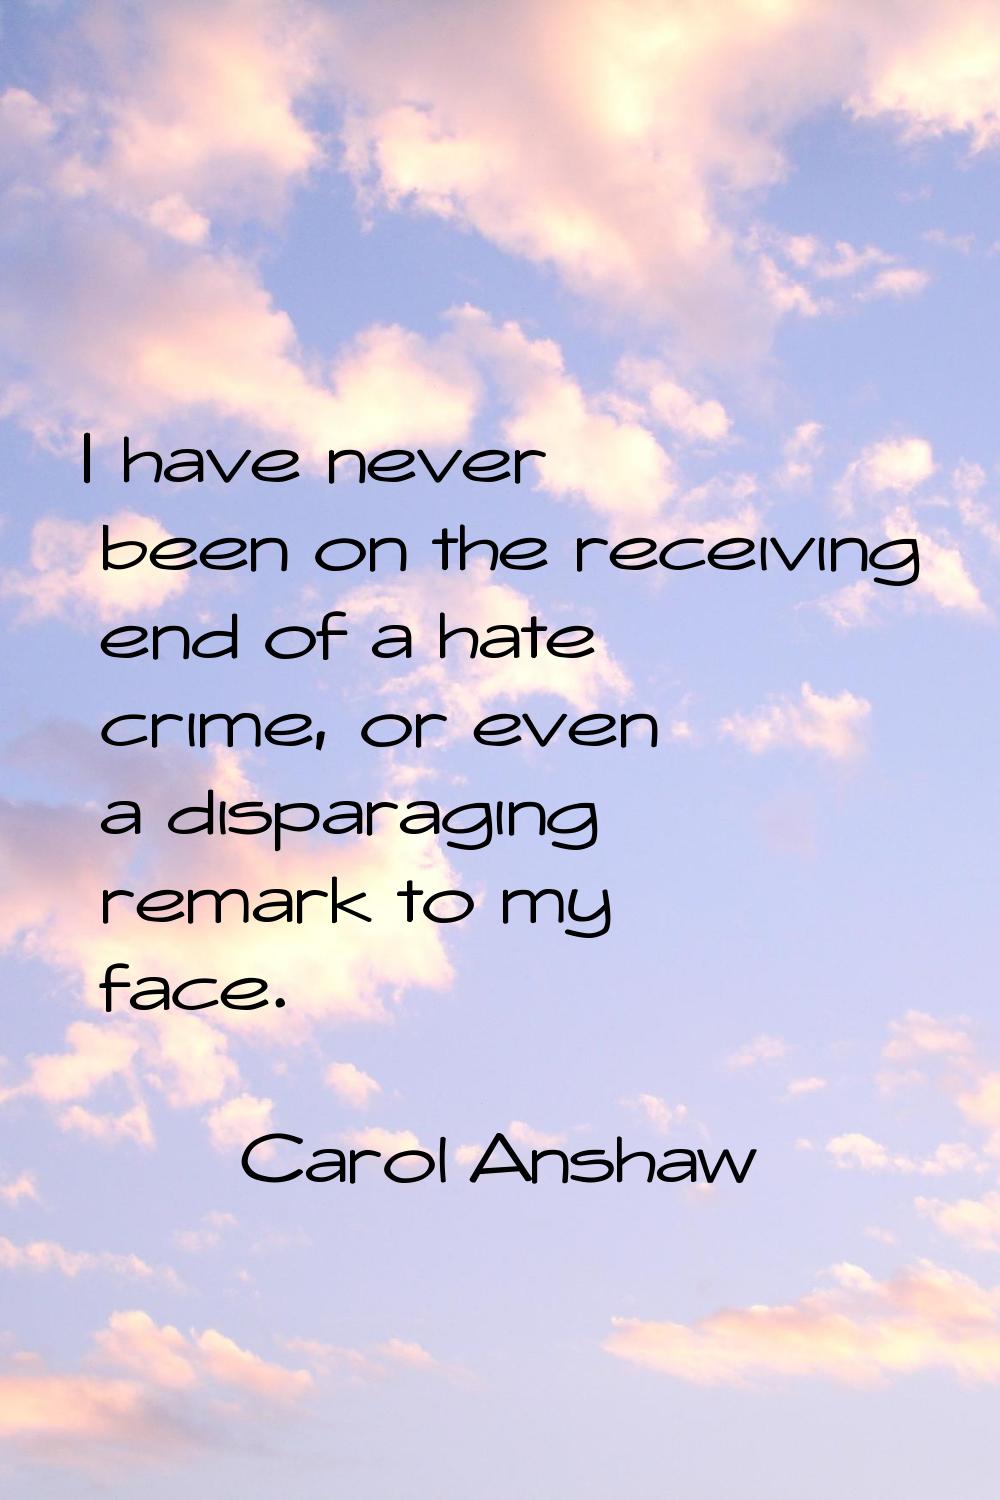 I have never been on the receiving end of a hate crime, or even a disparaging remark to my face.